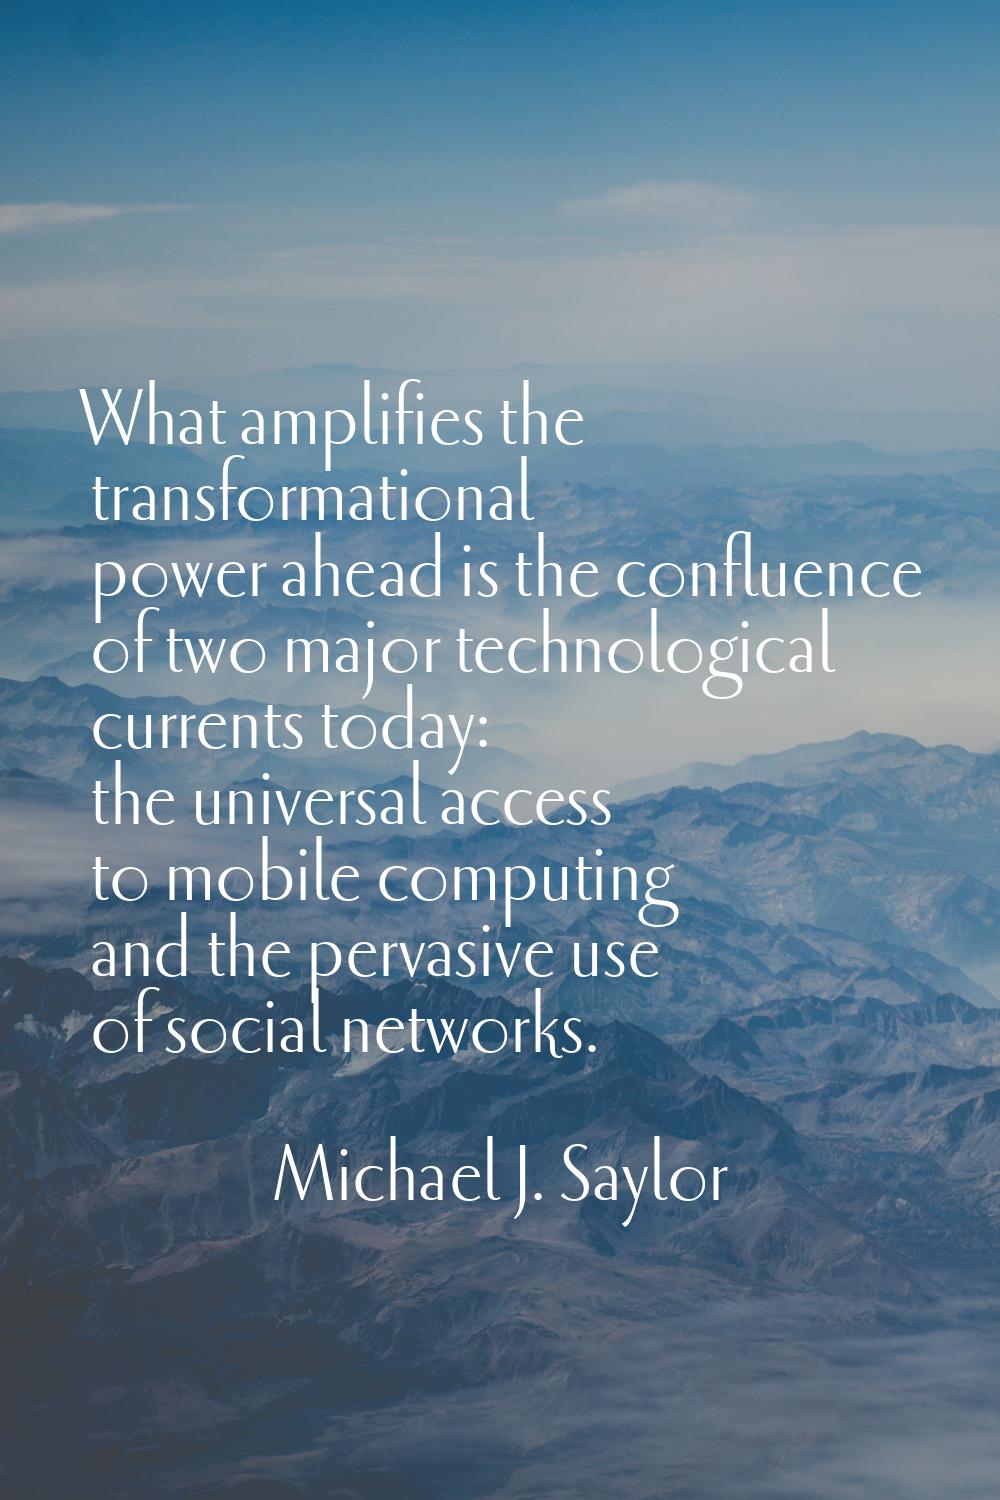 What amplifies the transformational power ahead is the confluence of two major technological curren